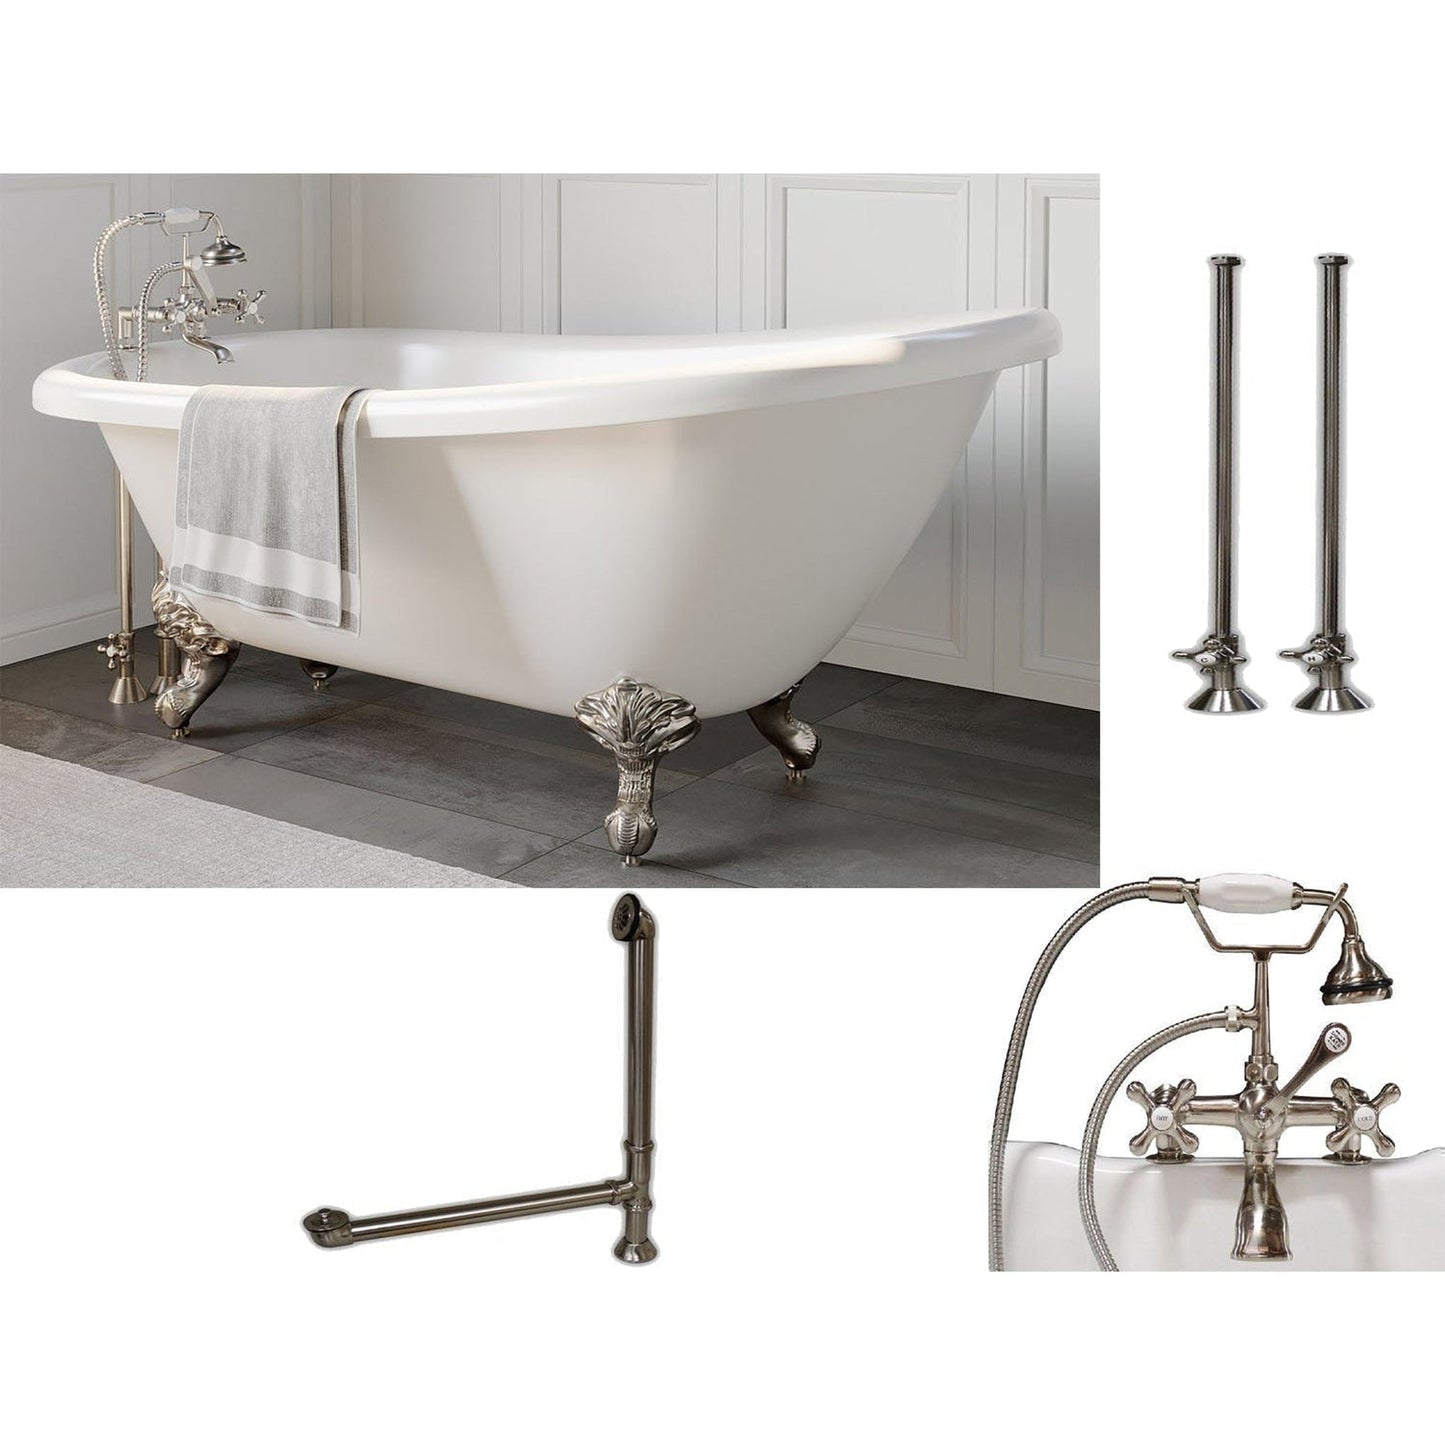 Cambridge Plumbing 61" White Acrylic Single Slipper Clawfeet Bathtub With Deck Holes And Complete Plumbing Package Including 2” Riser Deck Mount Faucet, Supply Lines, Drain And Overflow Assembly In Polished Chrome